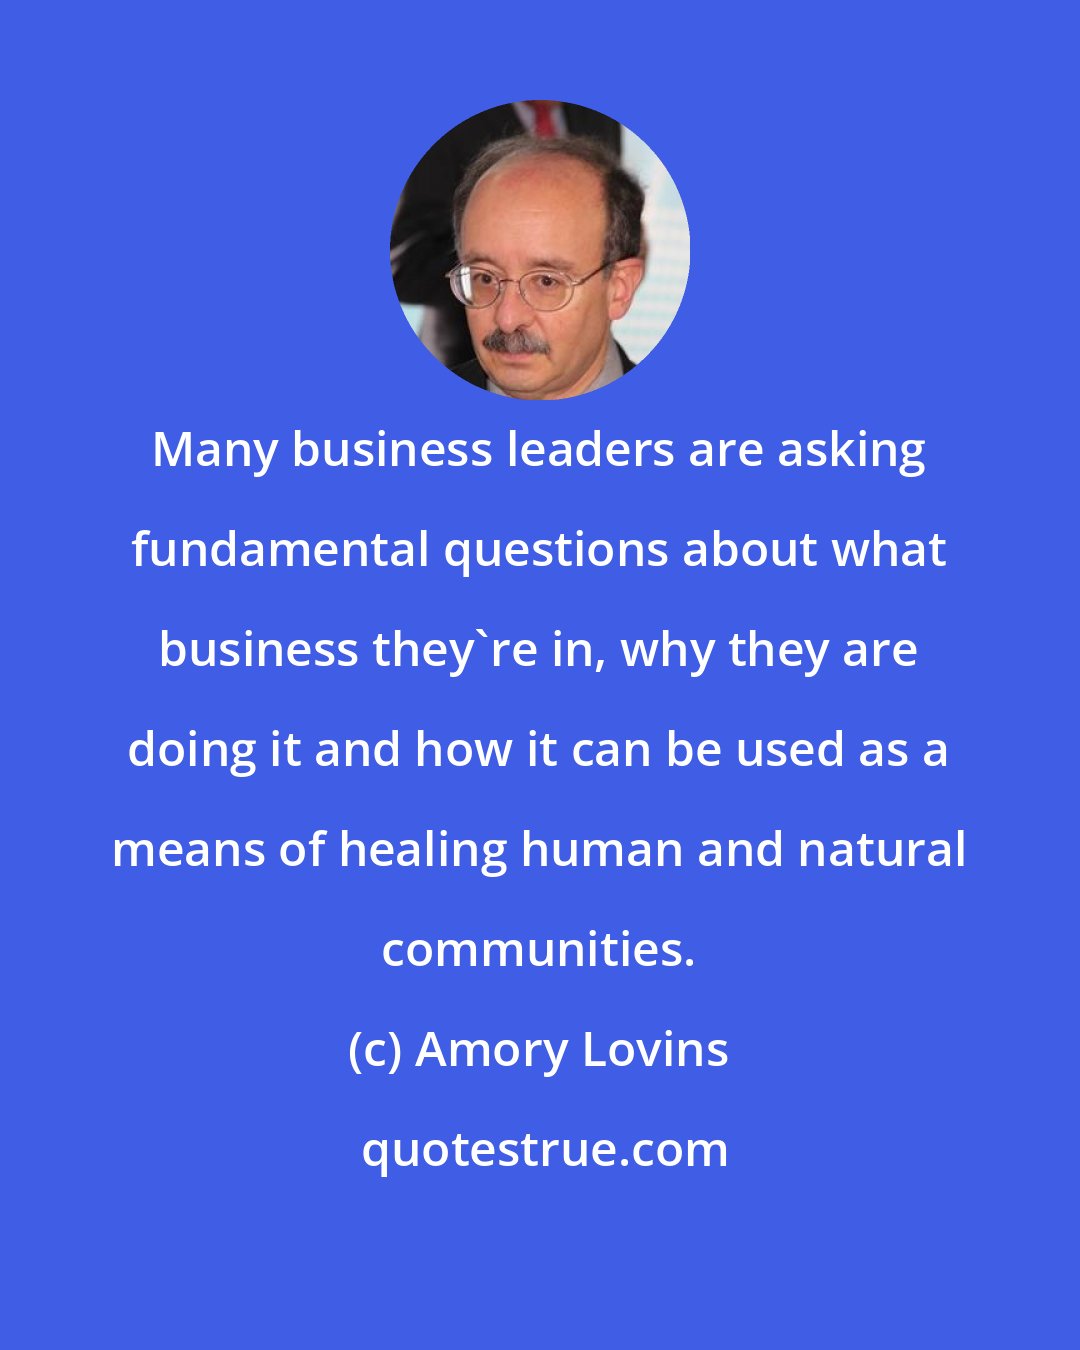 Amory Lovins: Many business leaders are asking fundamental questions about what business they're in, why they are doing it and how it can be used as a means of healing human and natural communities.